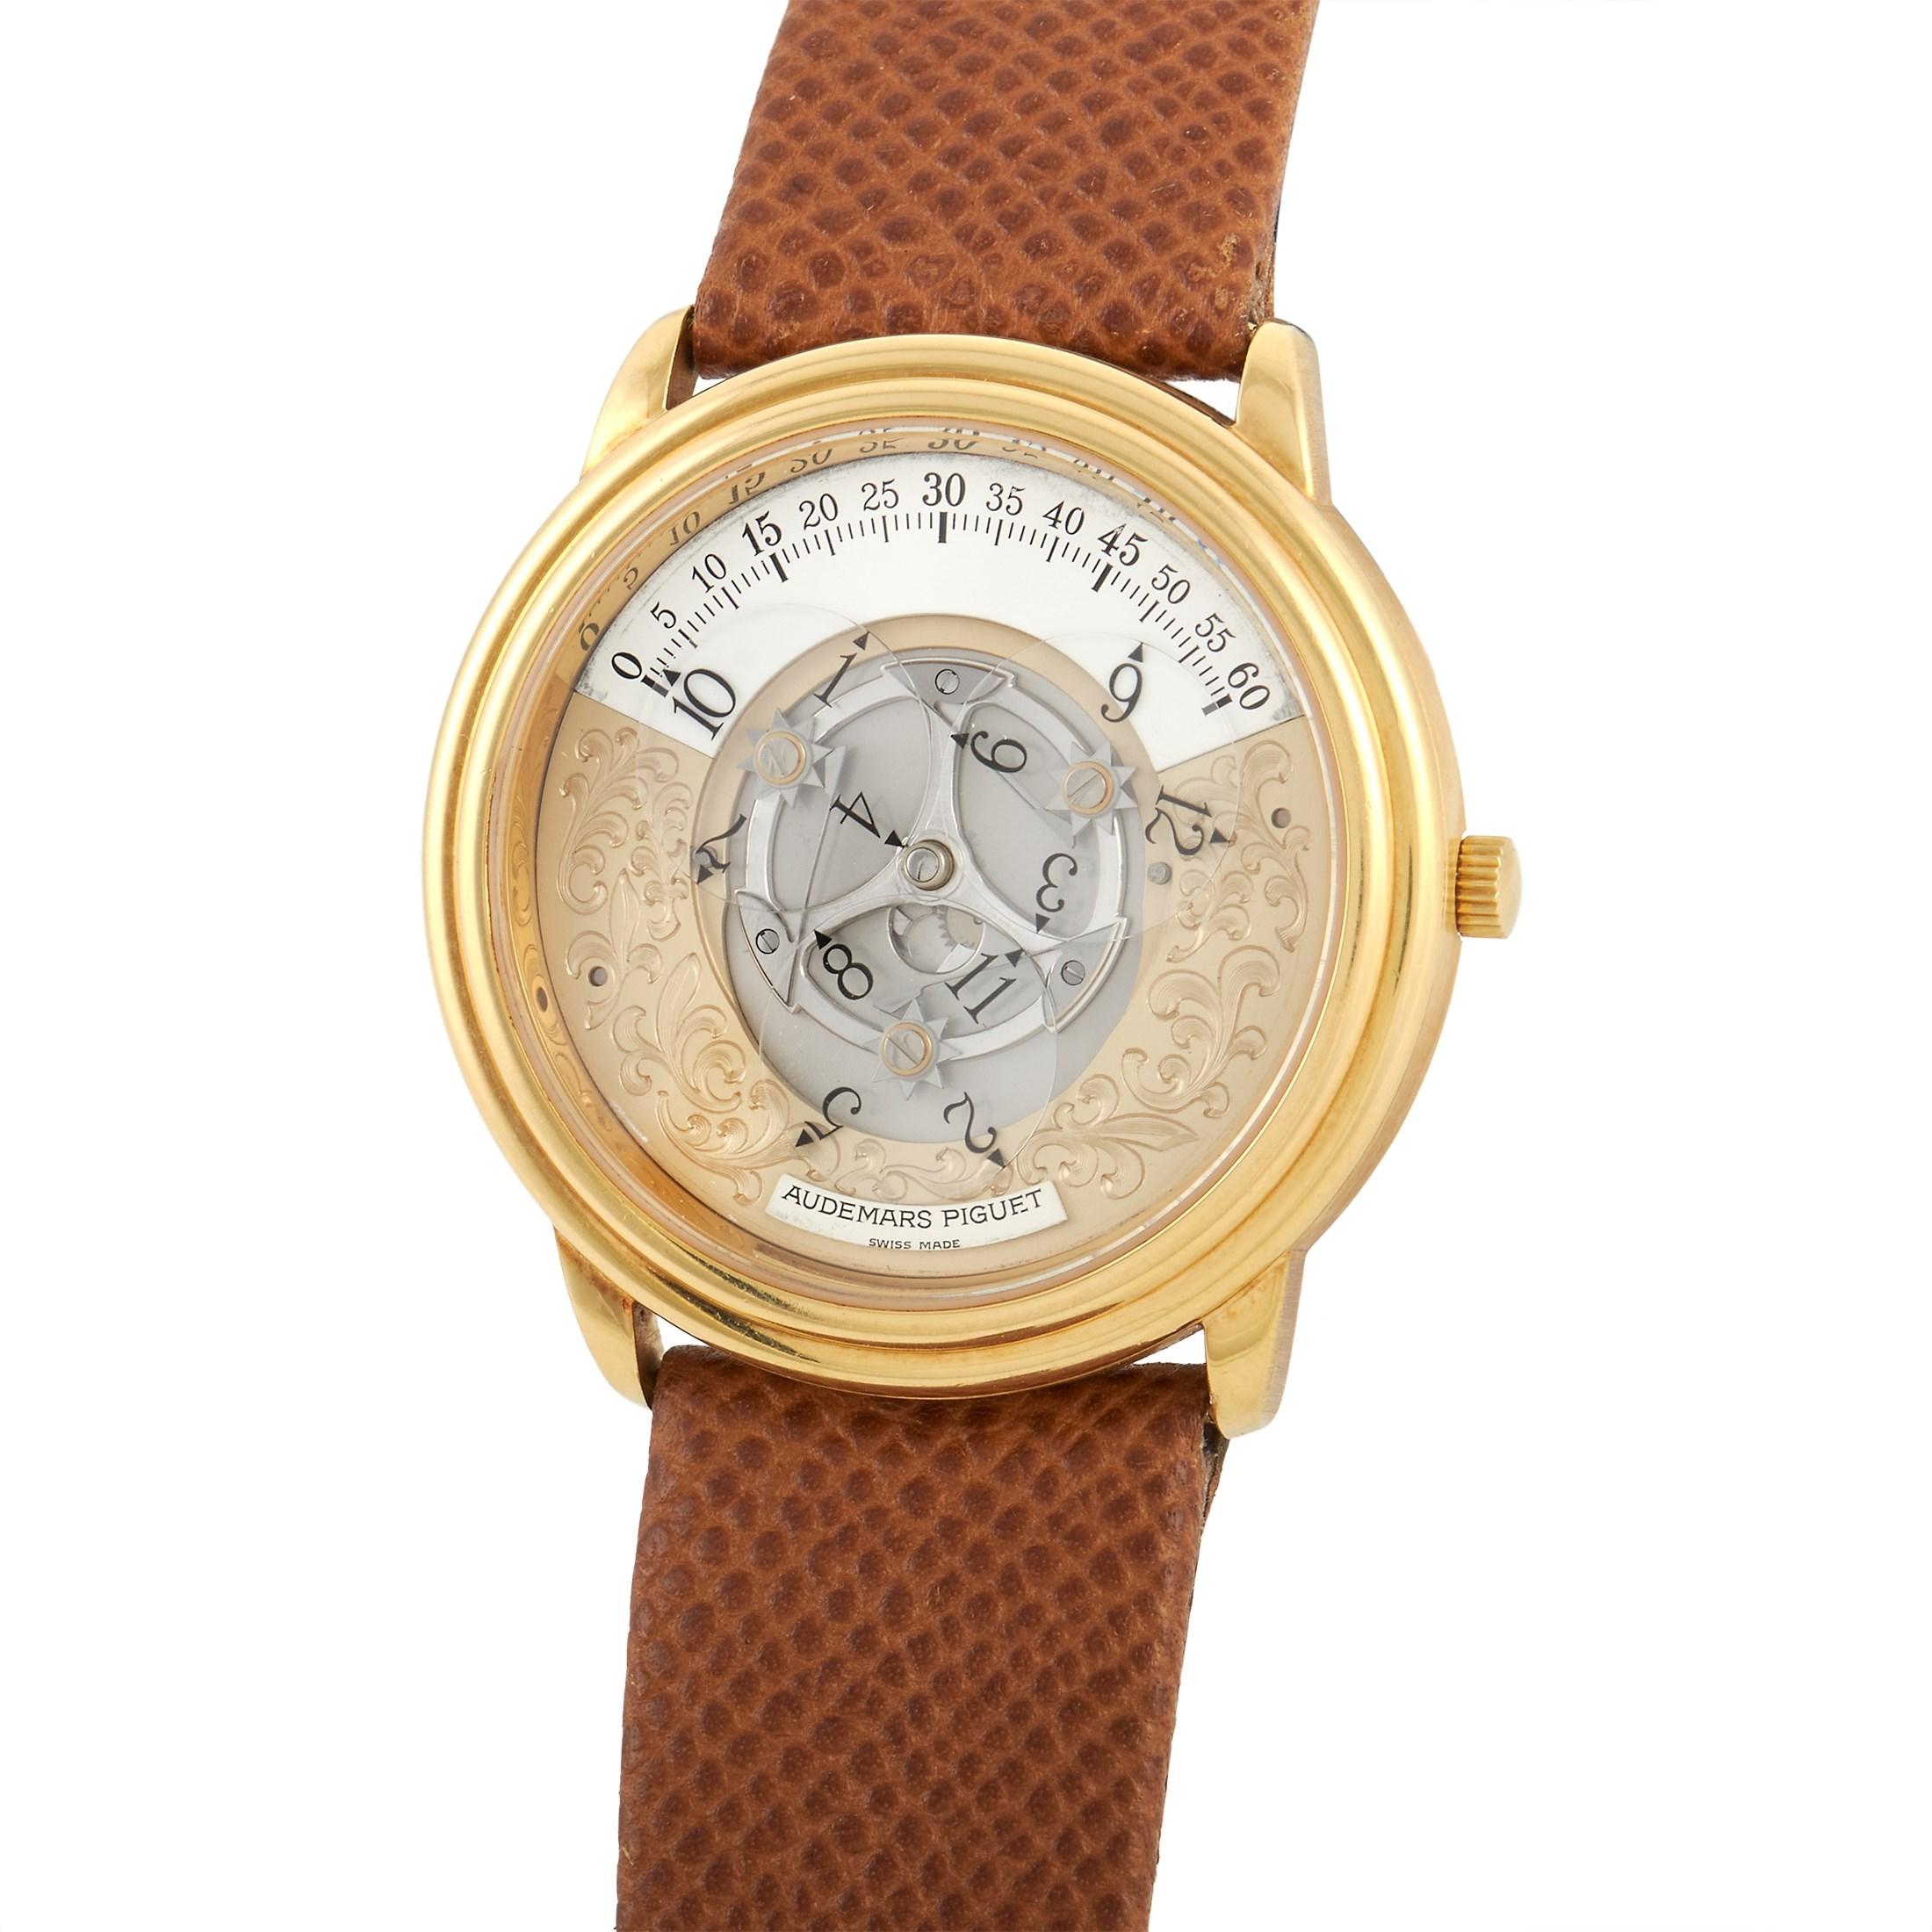 A whimsical yet luxurious timepiece that's sure to stand out among your collection. Designed with an unconventional yet elegant look, this watch features a yellow gold case housing a 